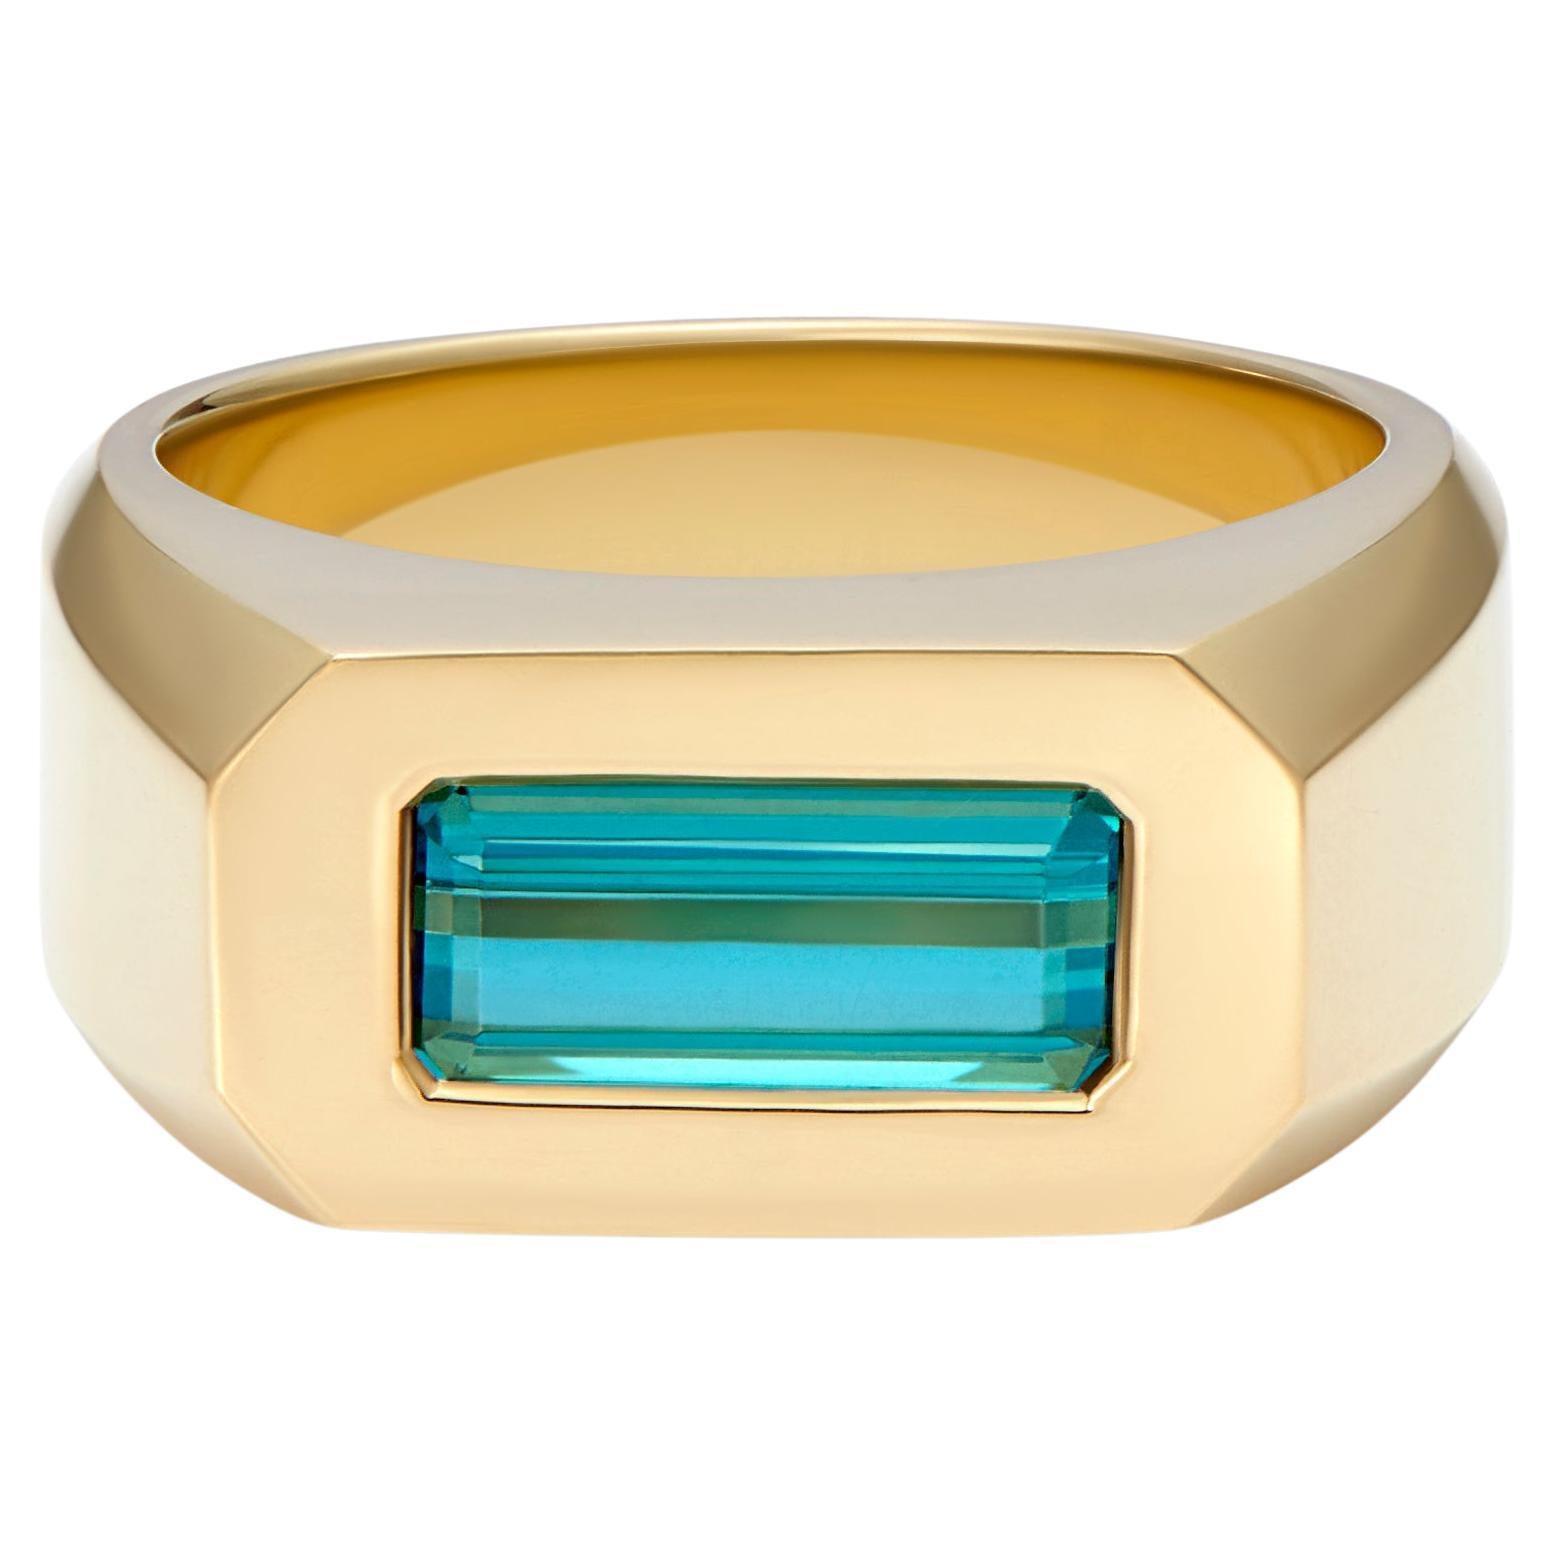 1.5ct Teal Tourmaline and Yellow Gold Pinky Ring